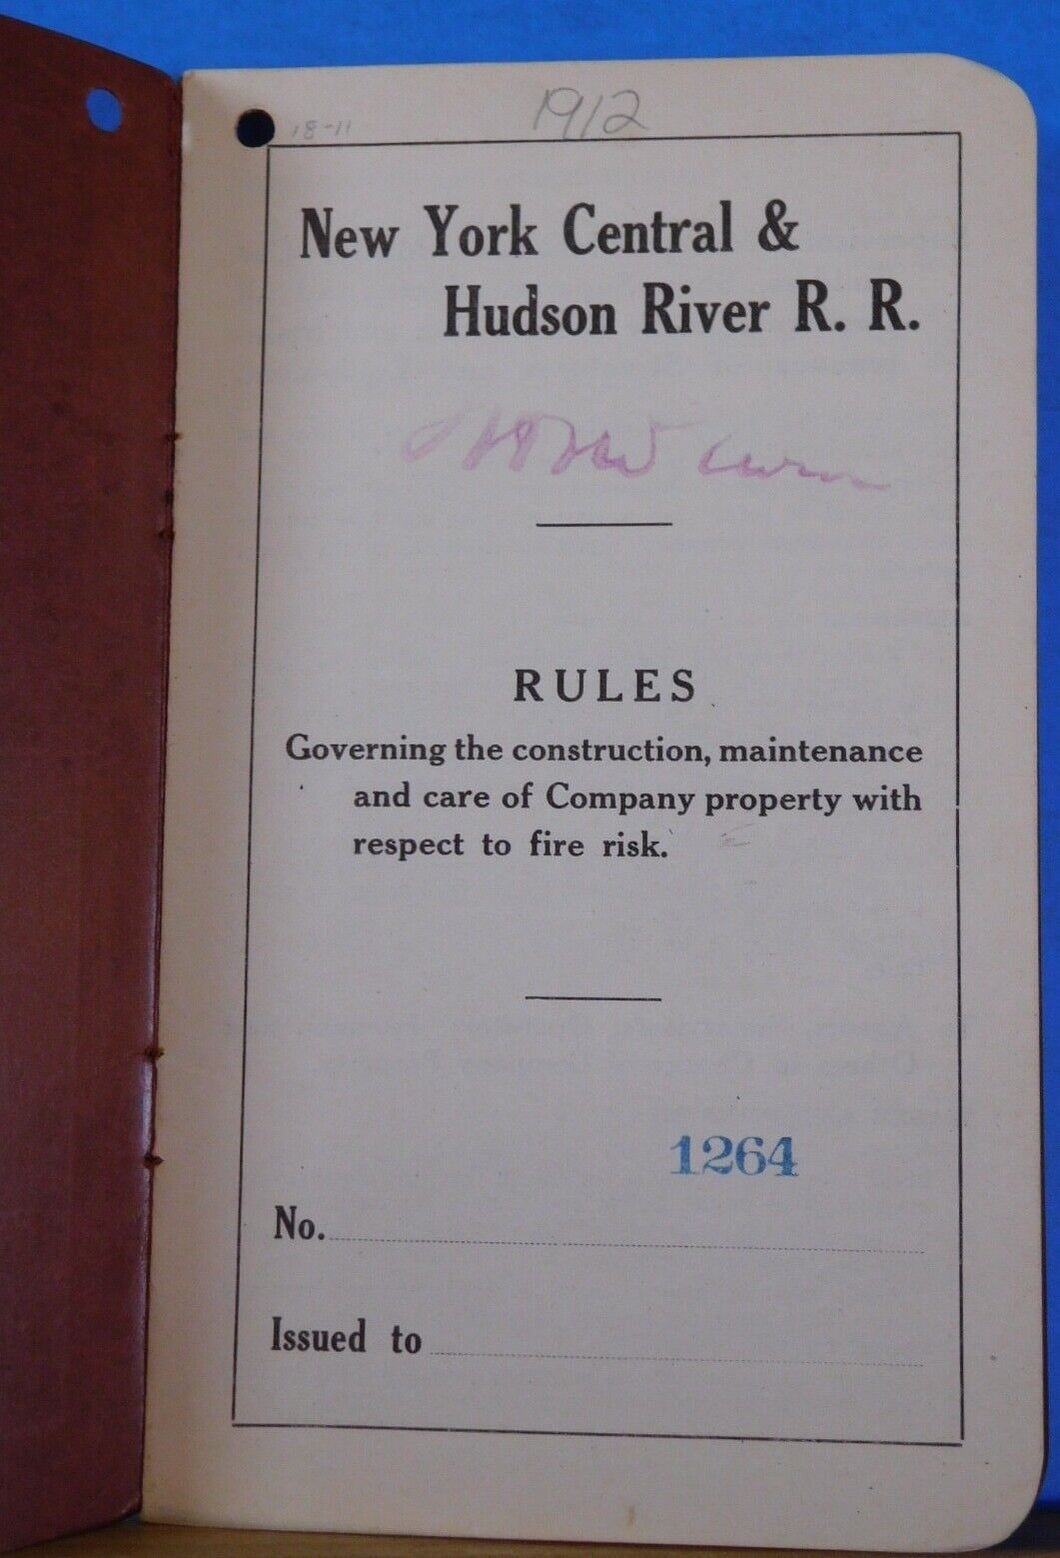 New York Central & Hudson River Railroad Rules Care of Company Property 1912